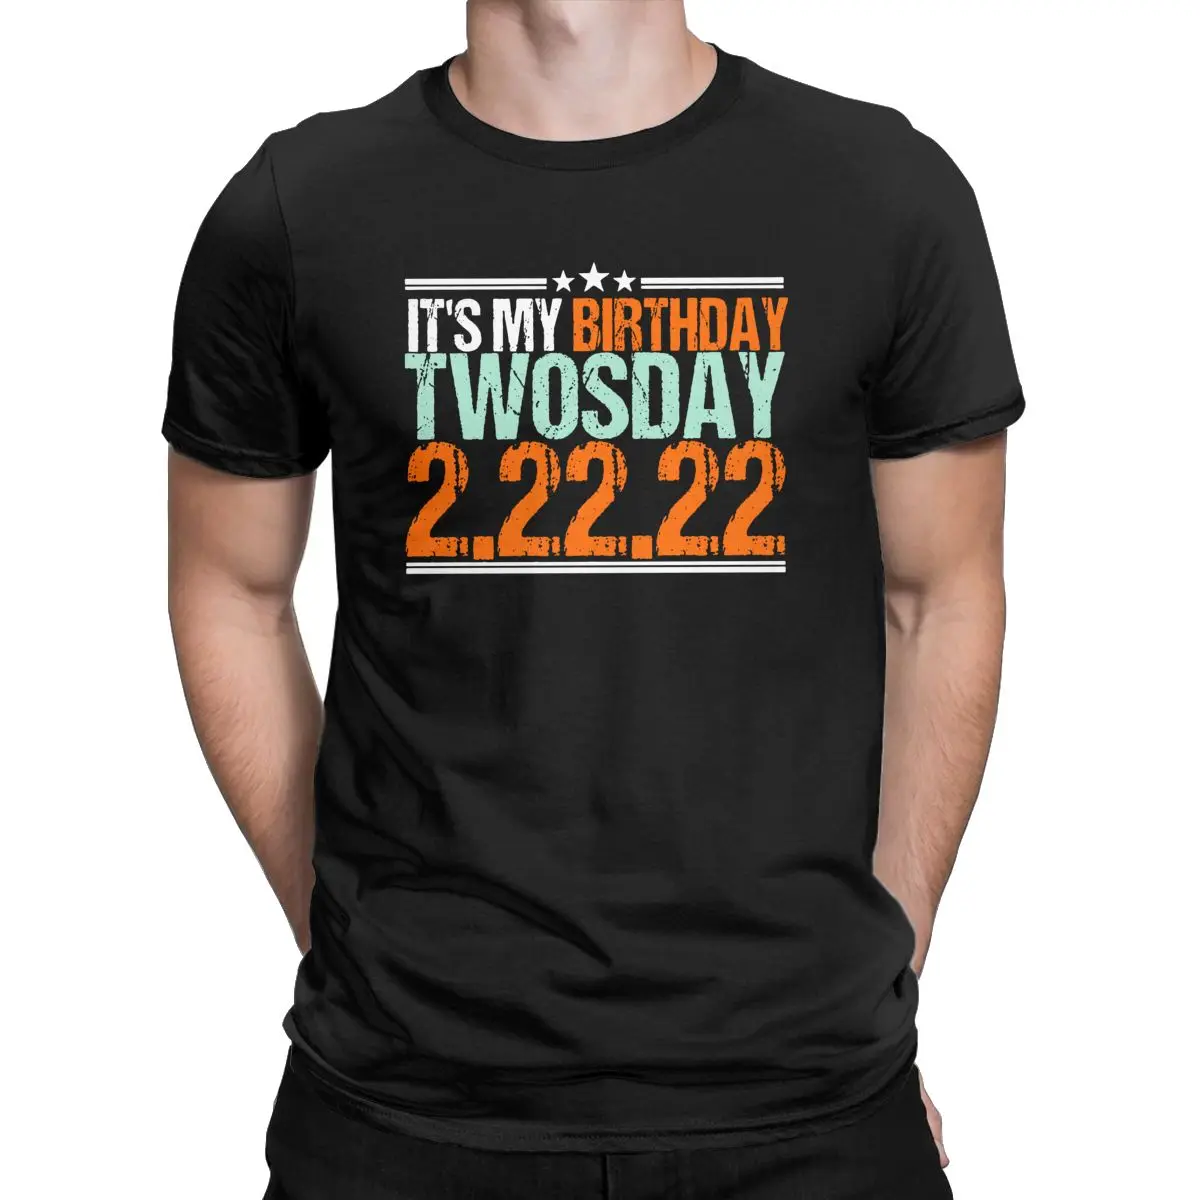 It's My Birthday Twosday Tuesday Funny Cotton Tees Short Sleeve Feb 22nd 2022 Birthday Gift T Shirt O Neck Tops Summer